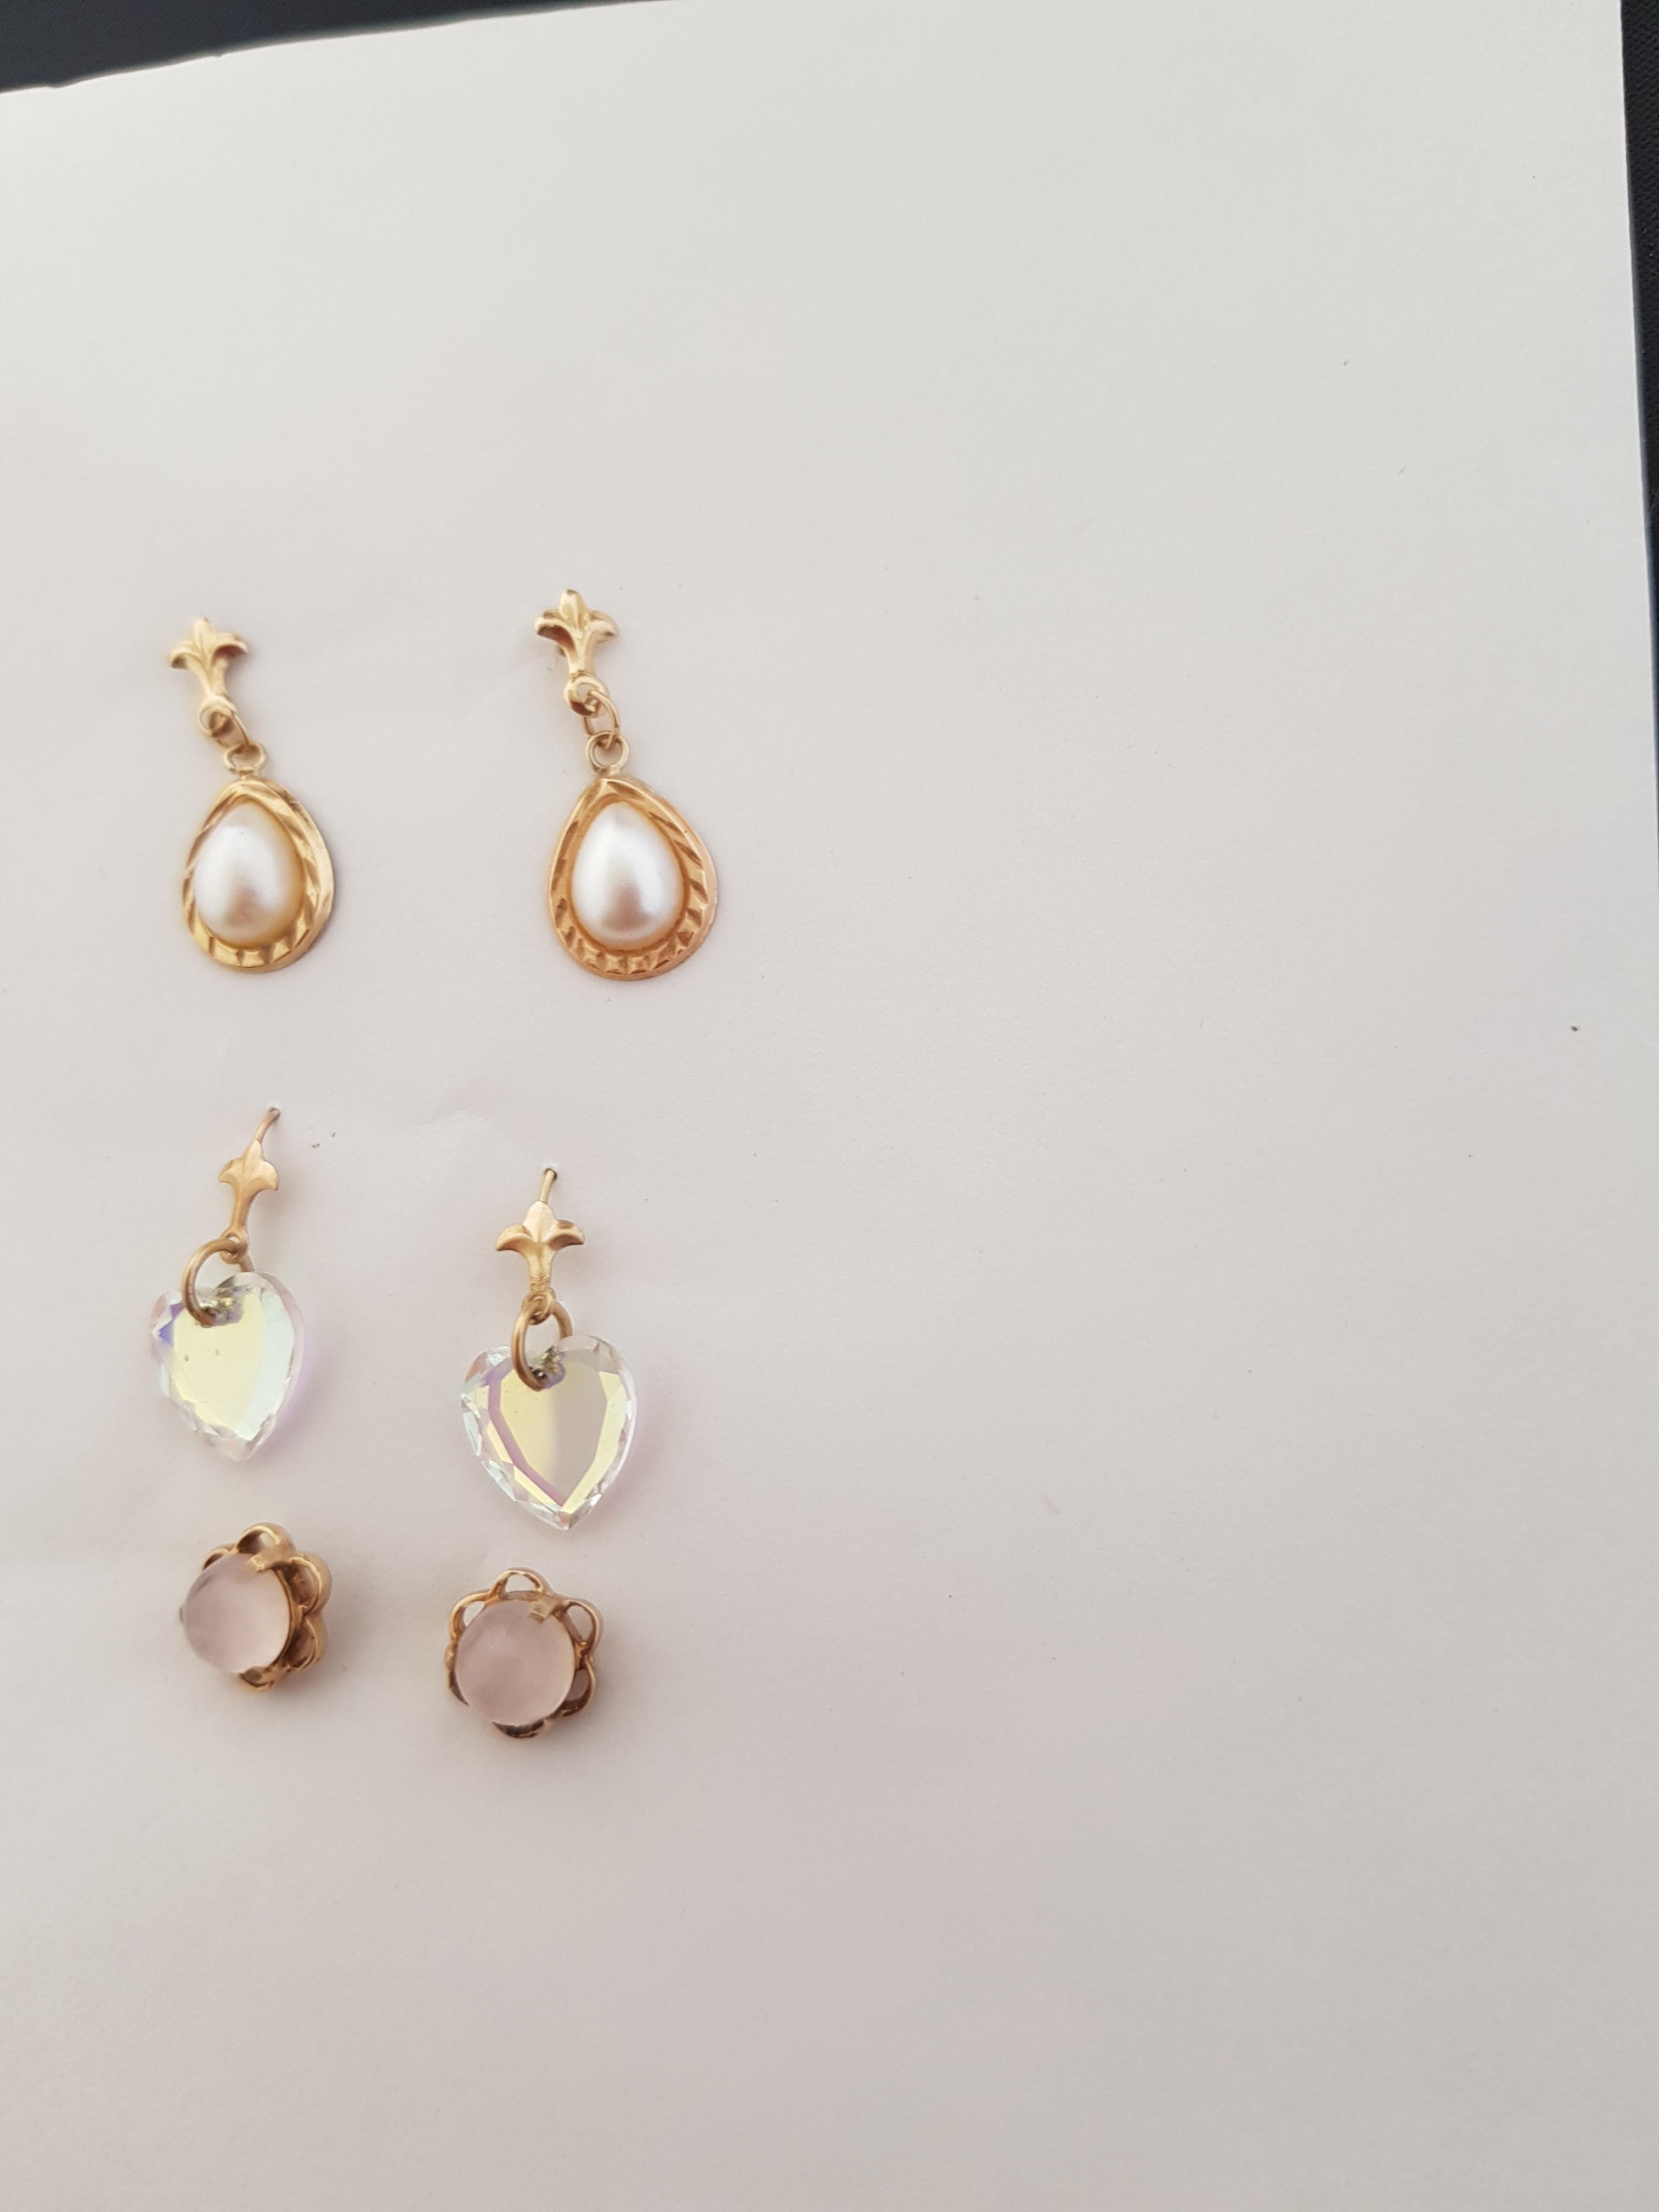 Collection of Gold Earings - Image 2 of 2